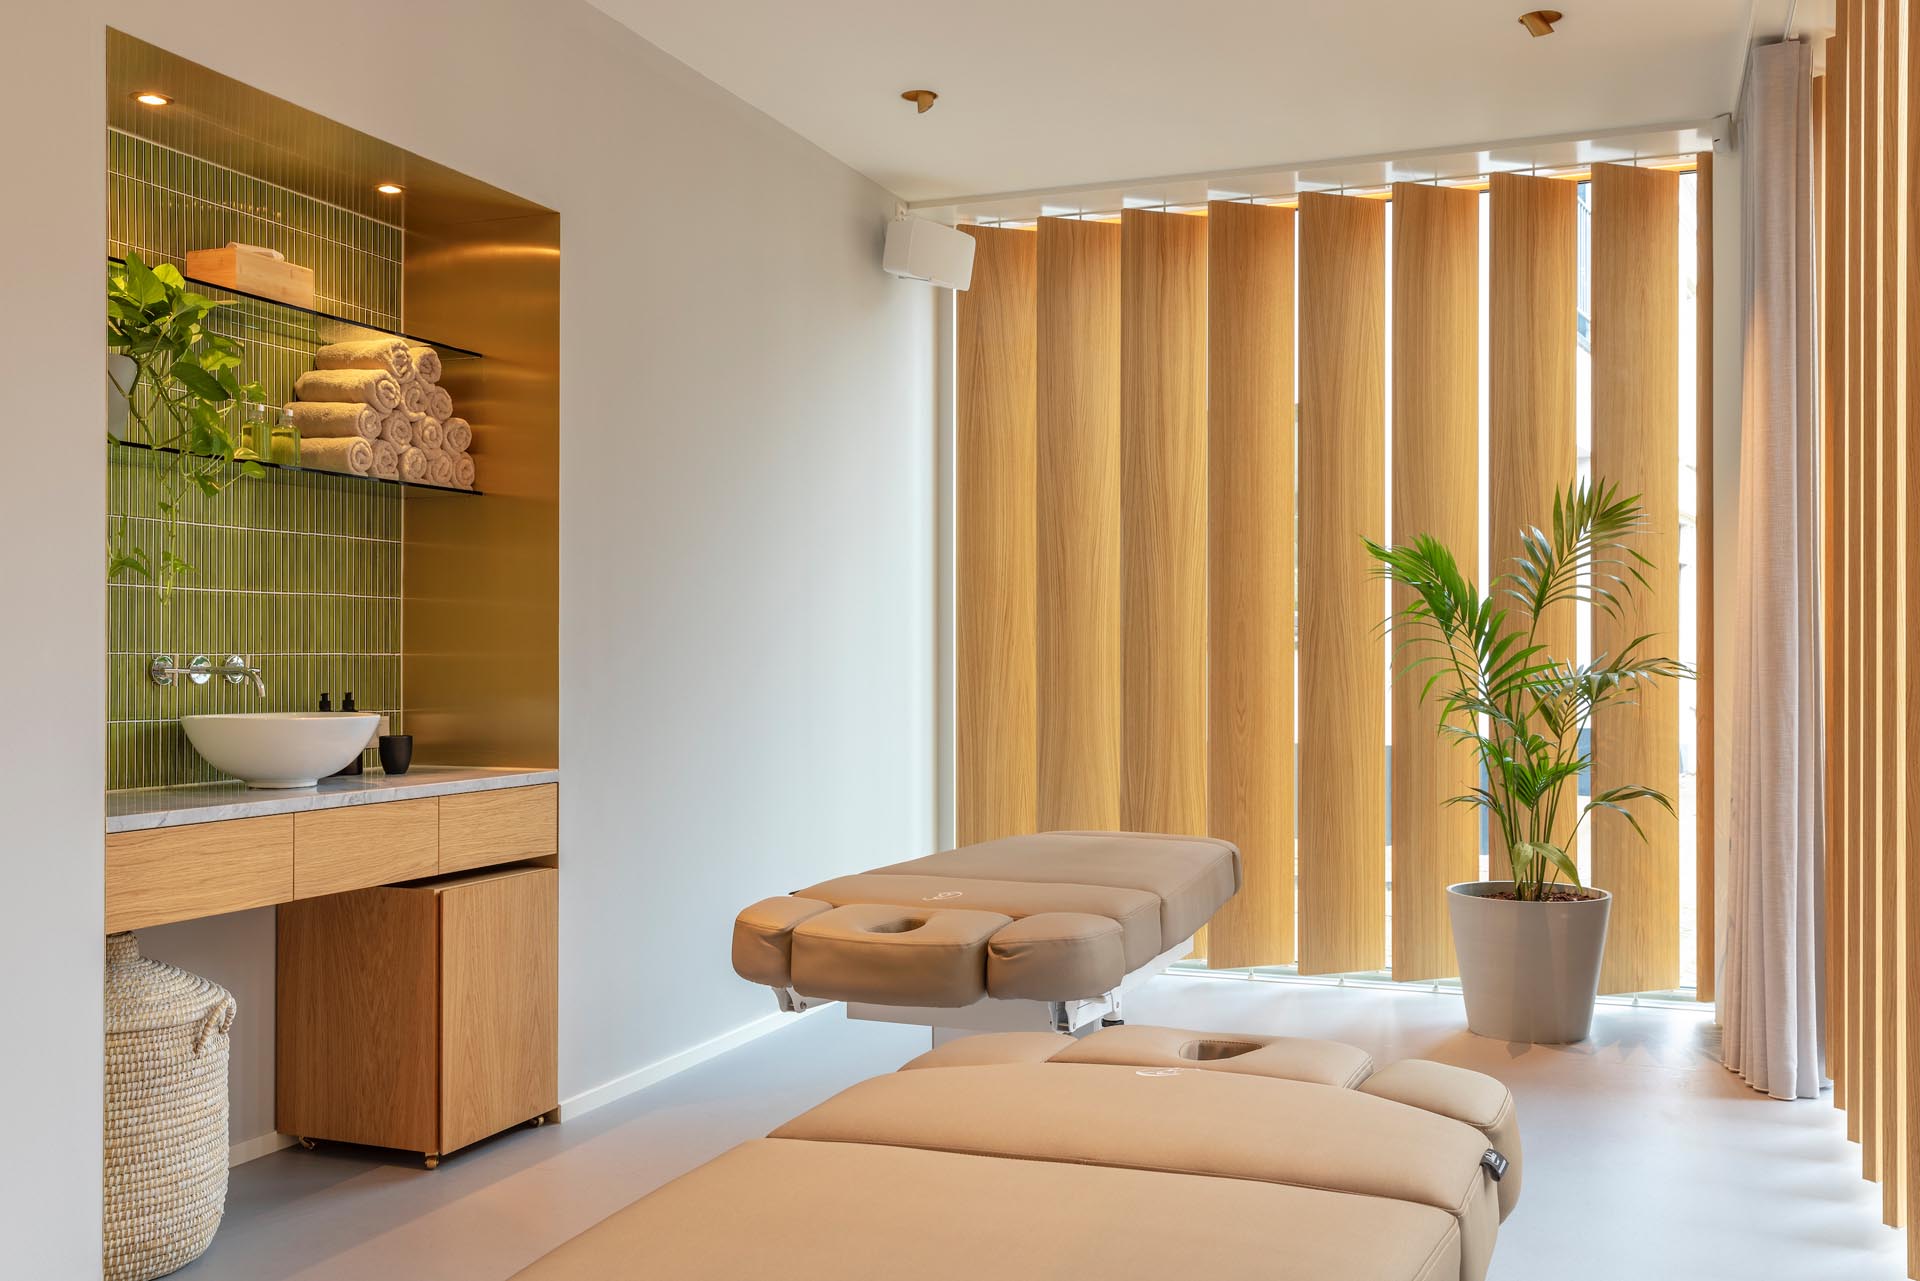 These private treatment rooms in a massage boutique feature floor-to-ceiling, pivoting oak lamellas that gently block the views from passers-by when they are closed. 